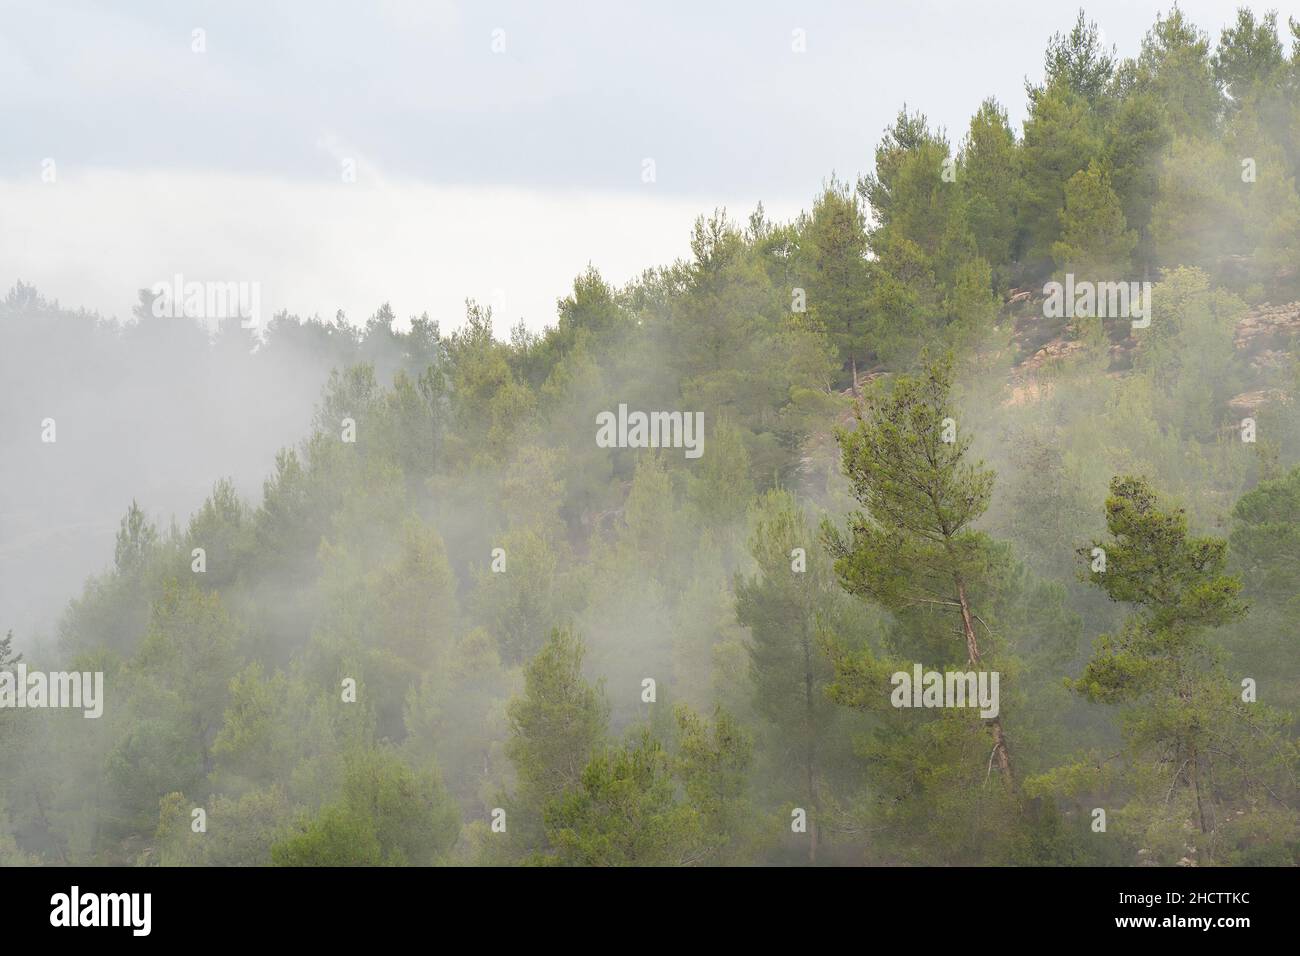 Fog advancing uphill in a pine forest in the Judea mountains, Israel Stock Photo